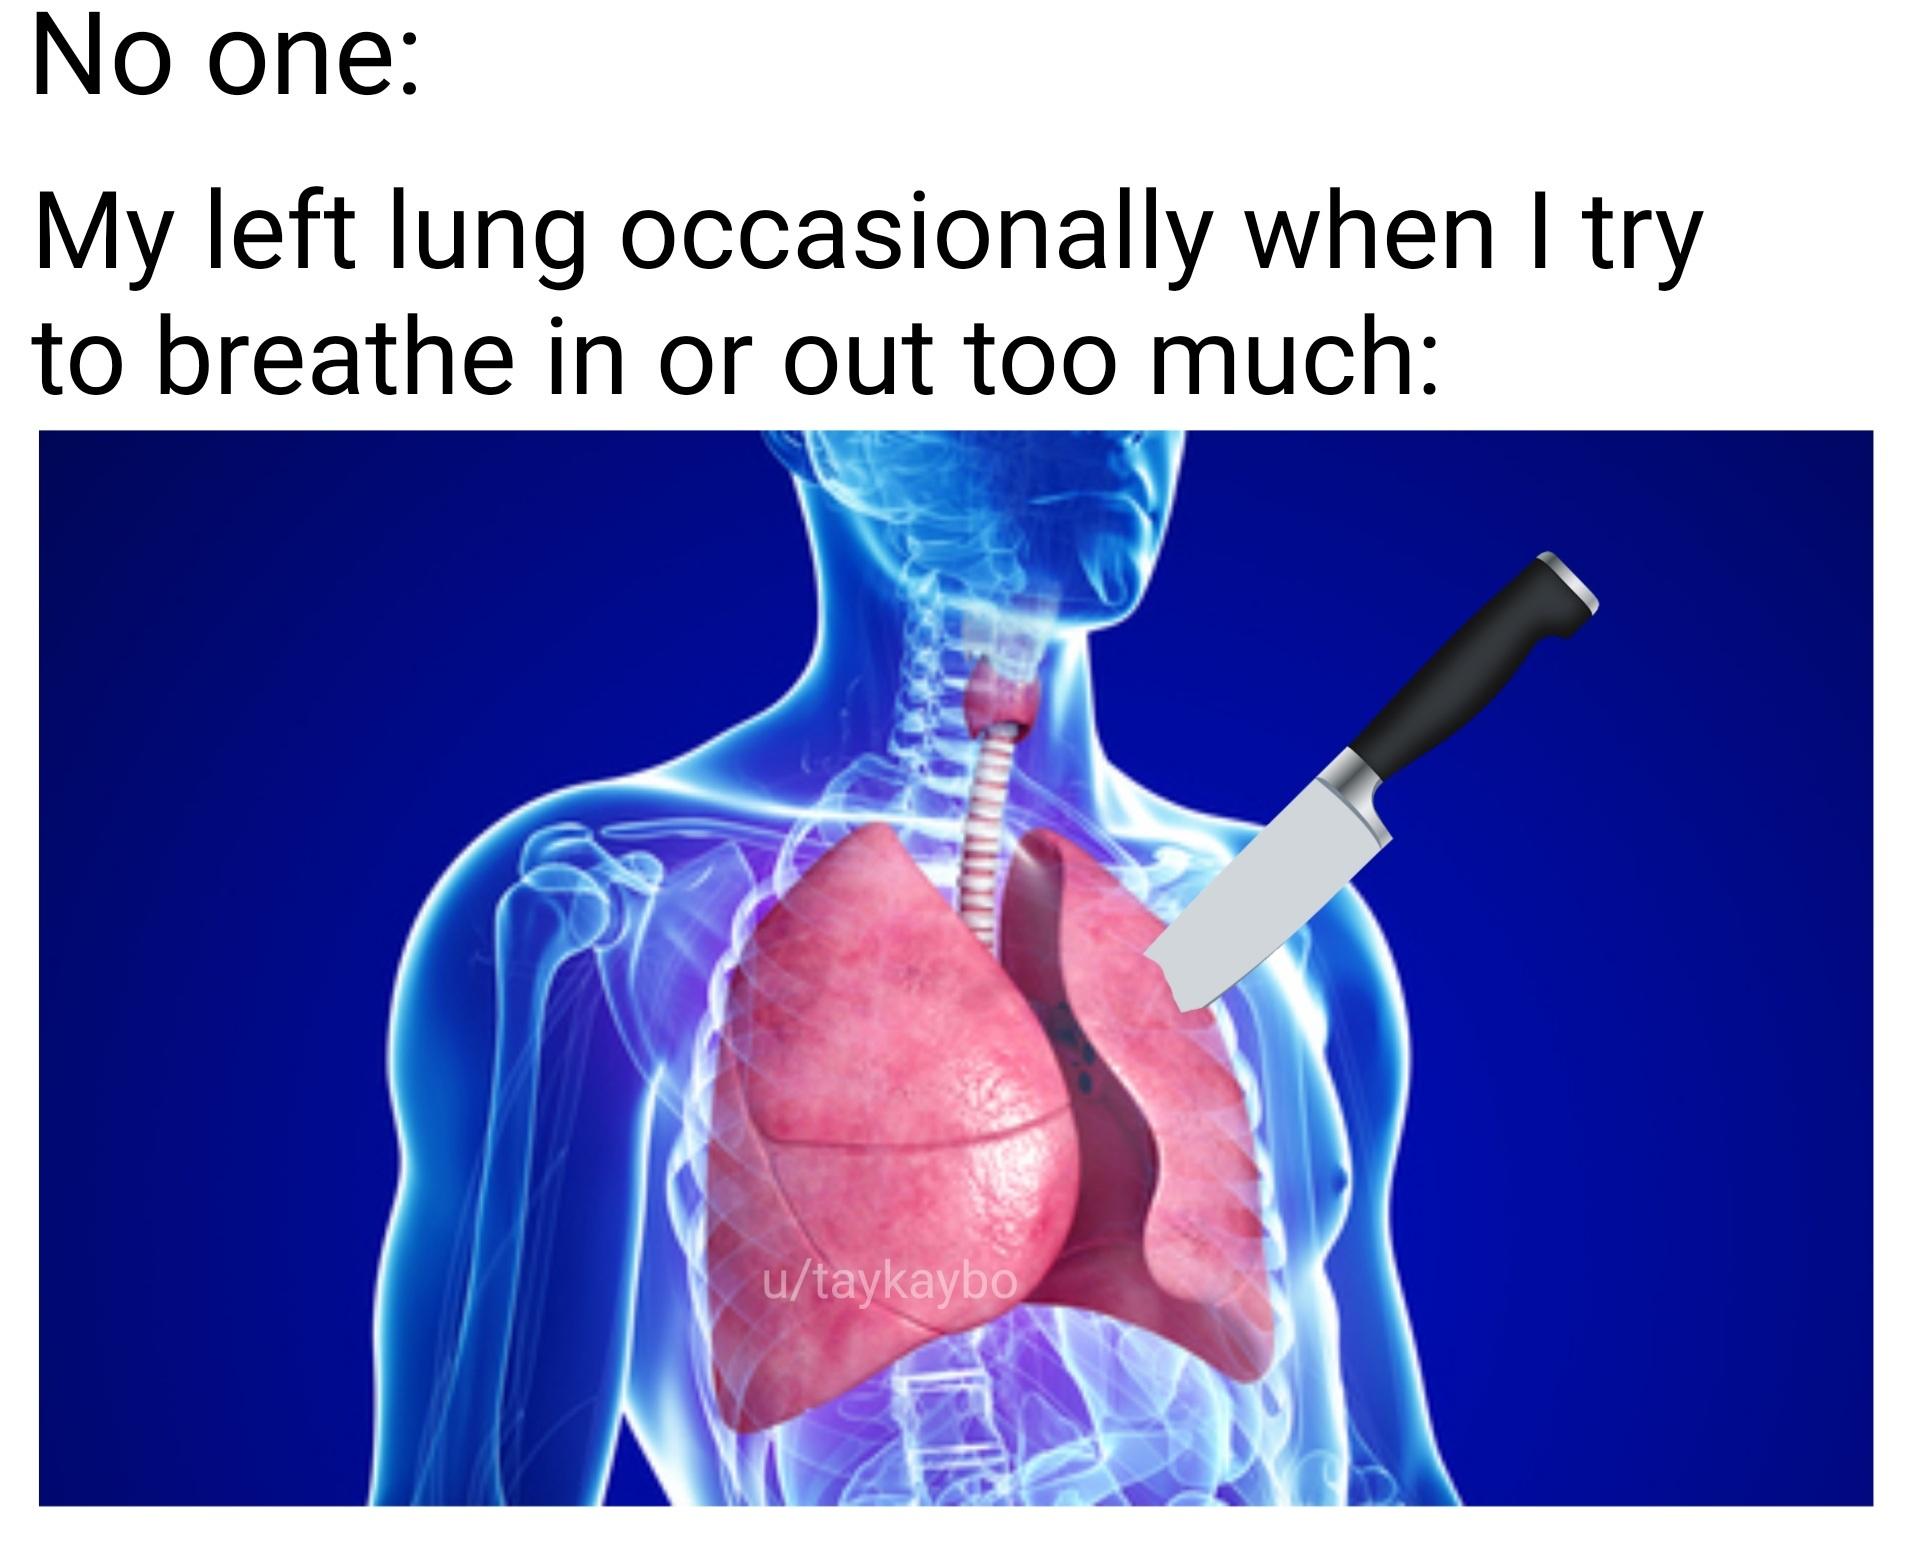 neurologist - No one My left lung occasionally when I try to breathe in or out too much utaykaybo